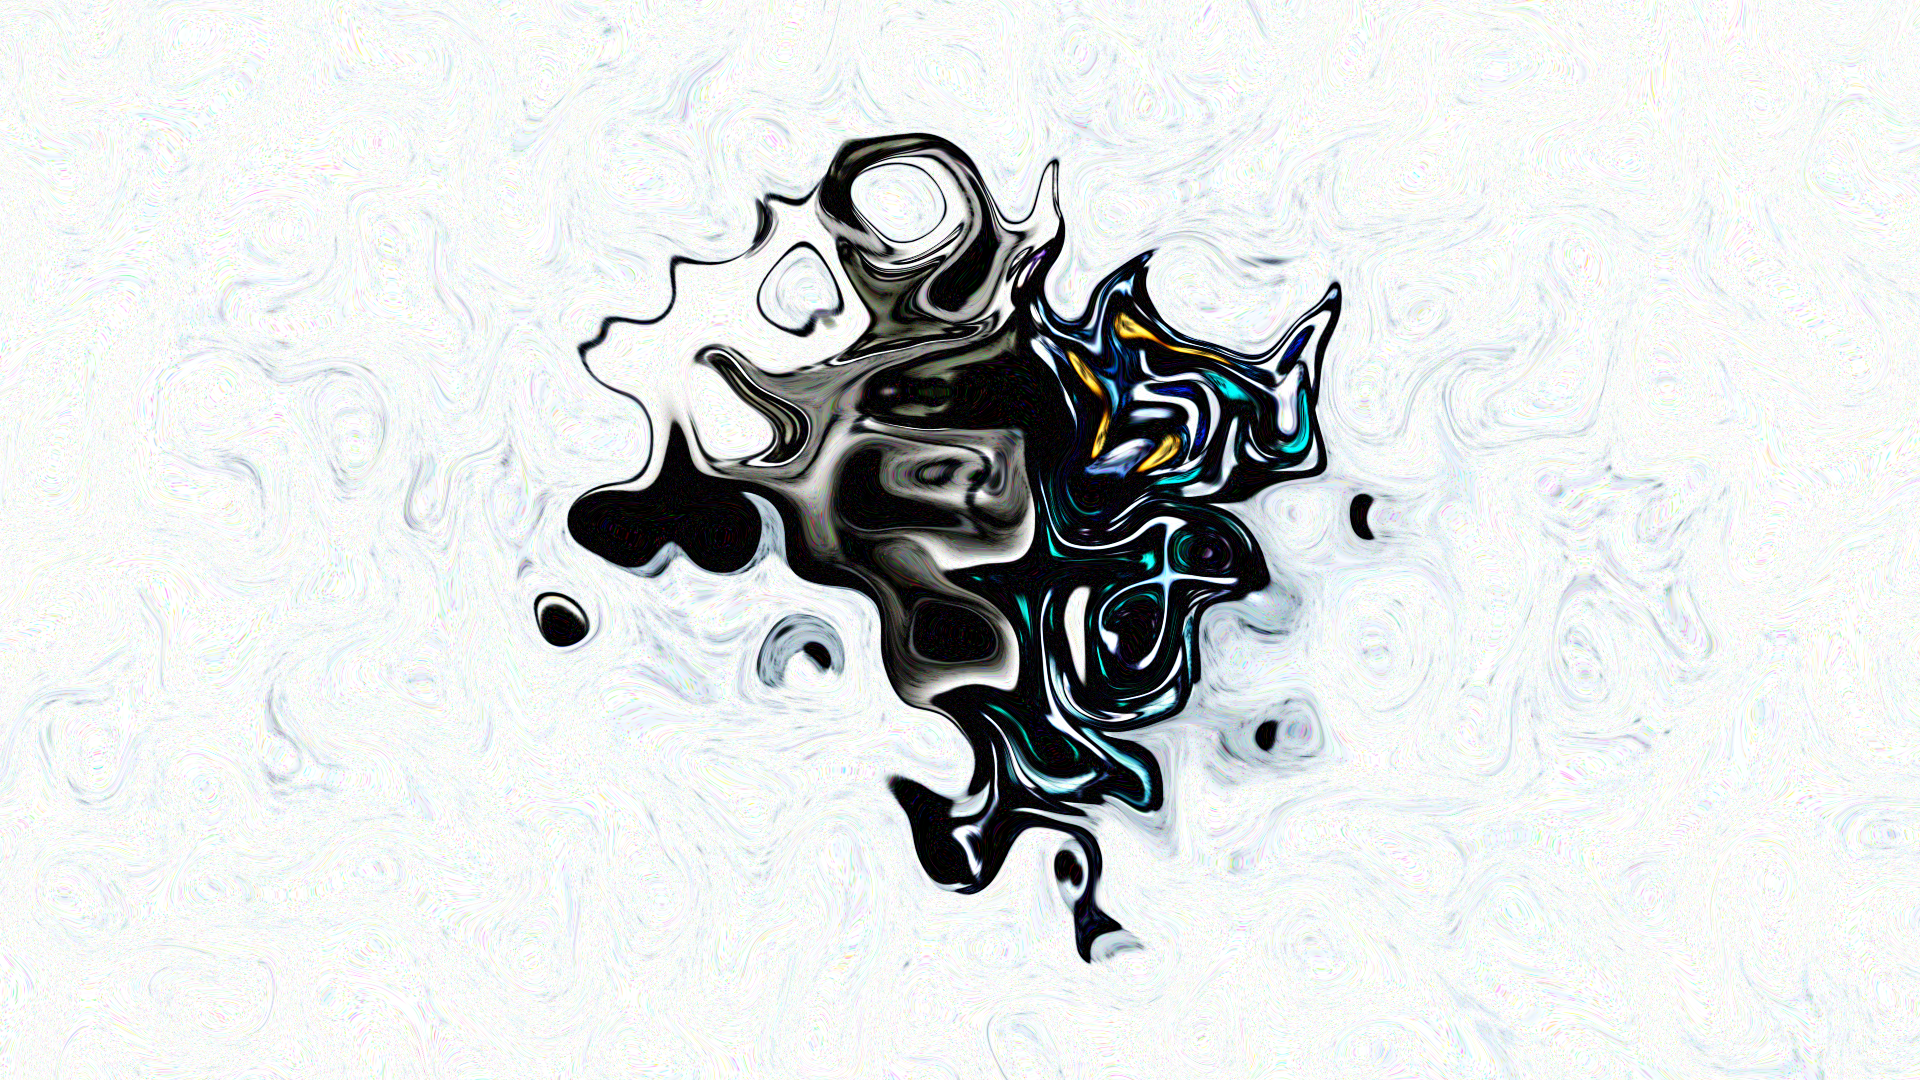 General 1920x1080 surreal shapes white background artwork white abstract digital art